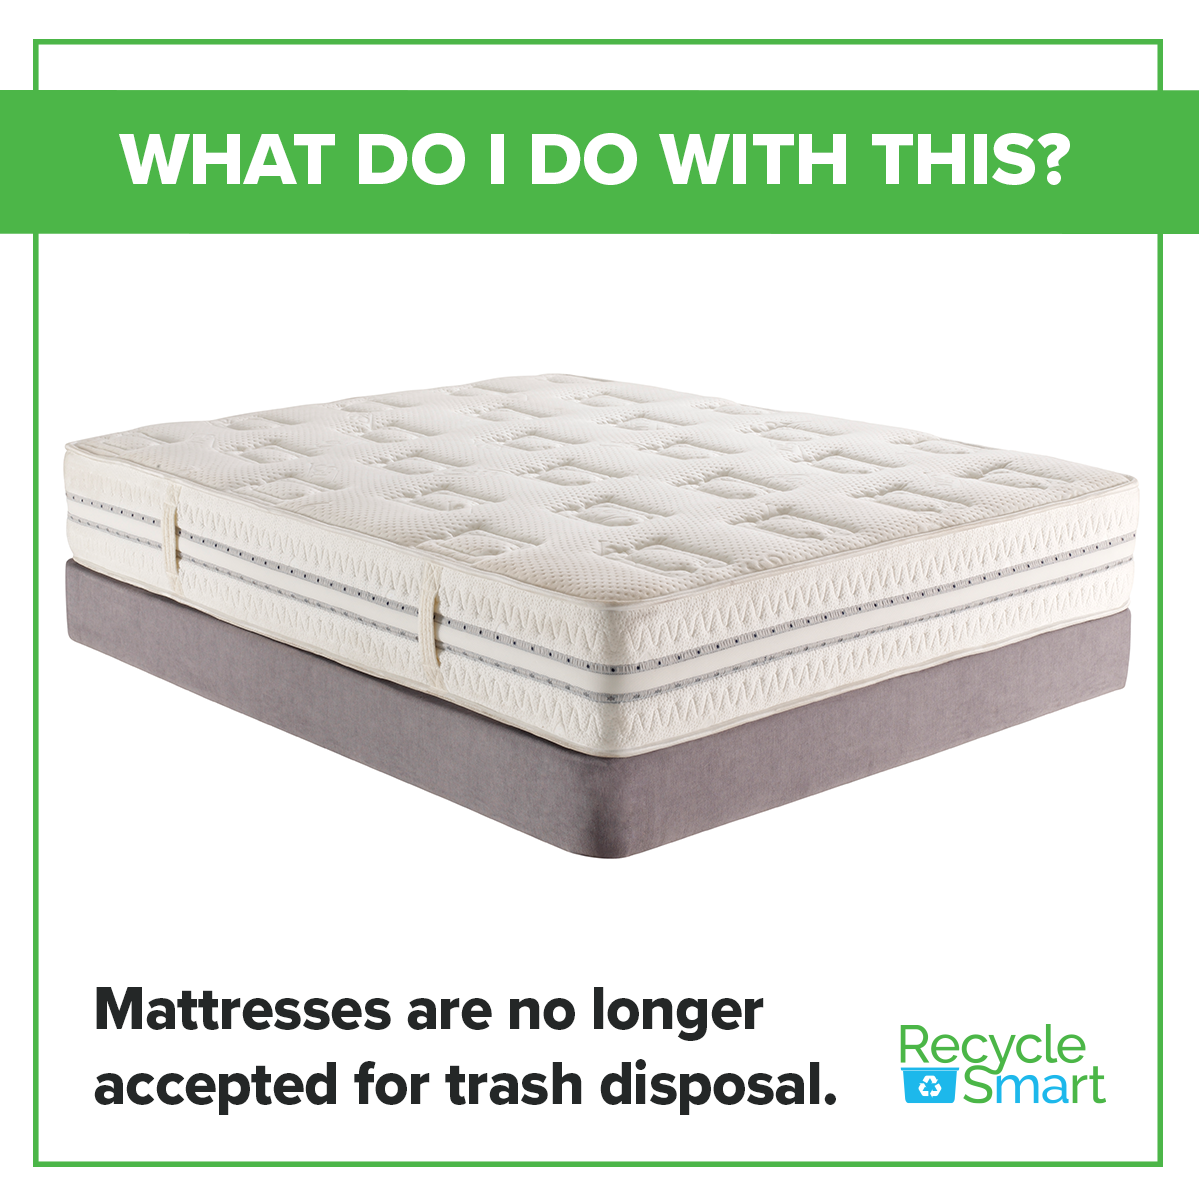 Mattresses can no longer be accepted for trash disposal and instead they are recycled with Tough Stuff Recycling. 